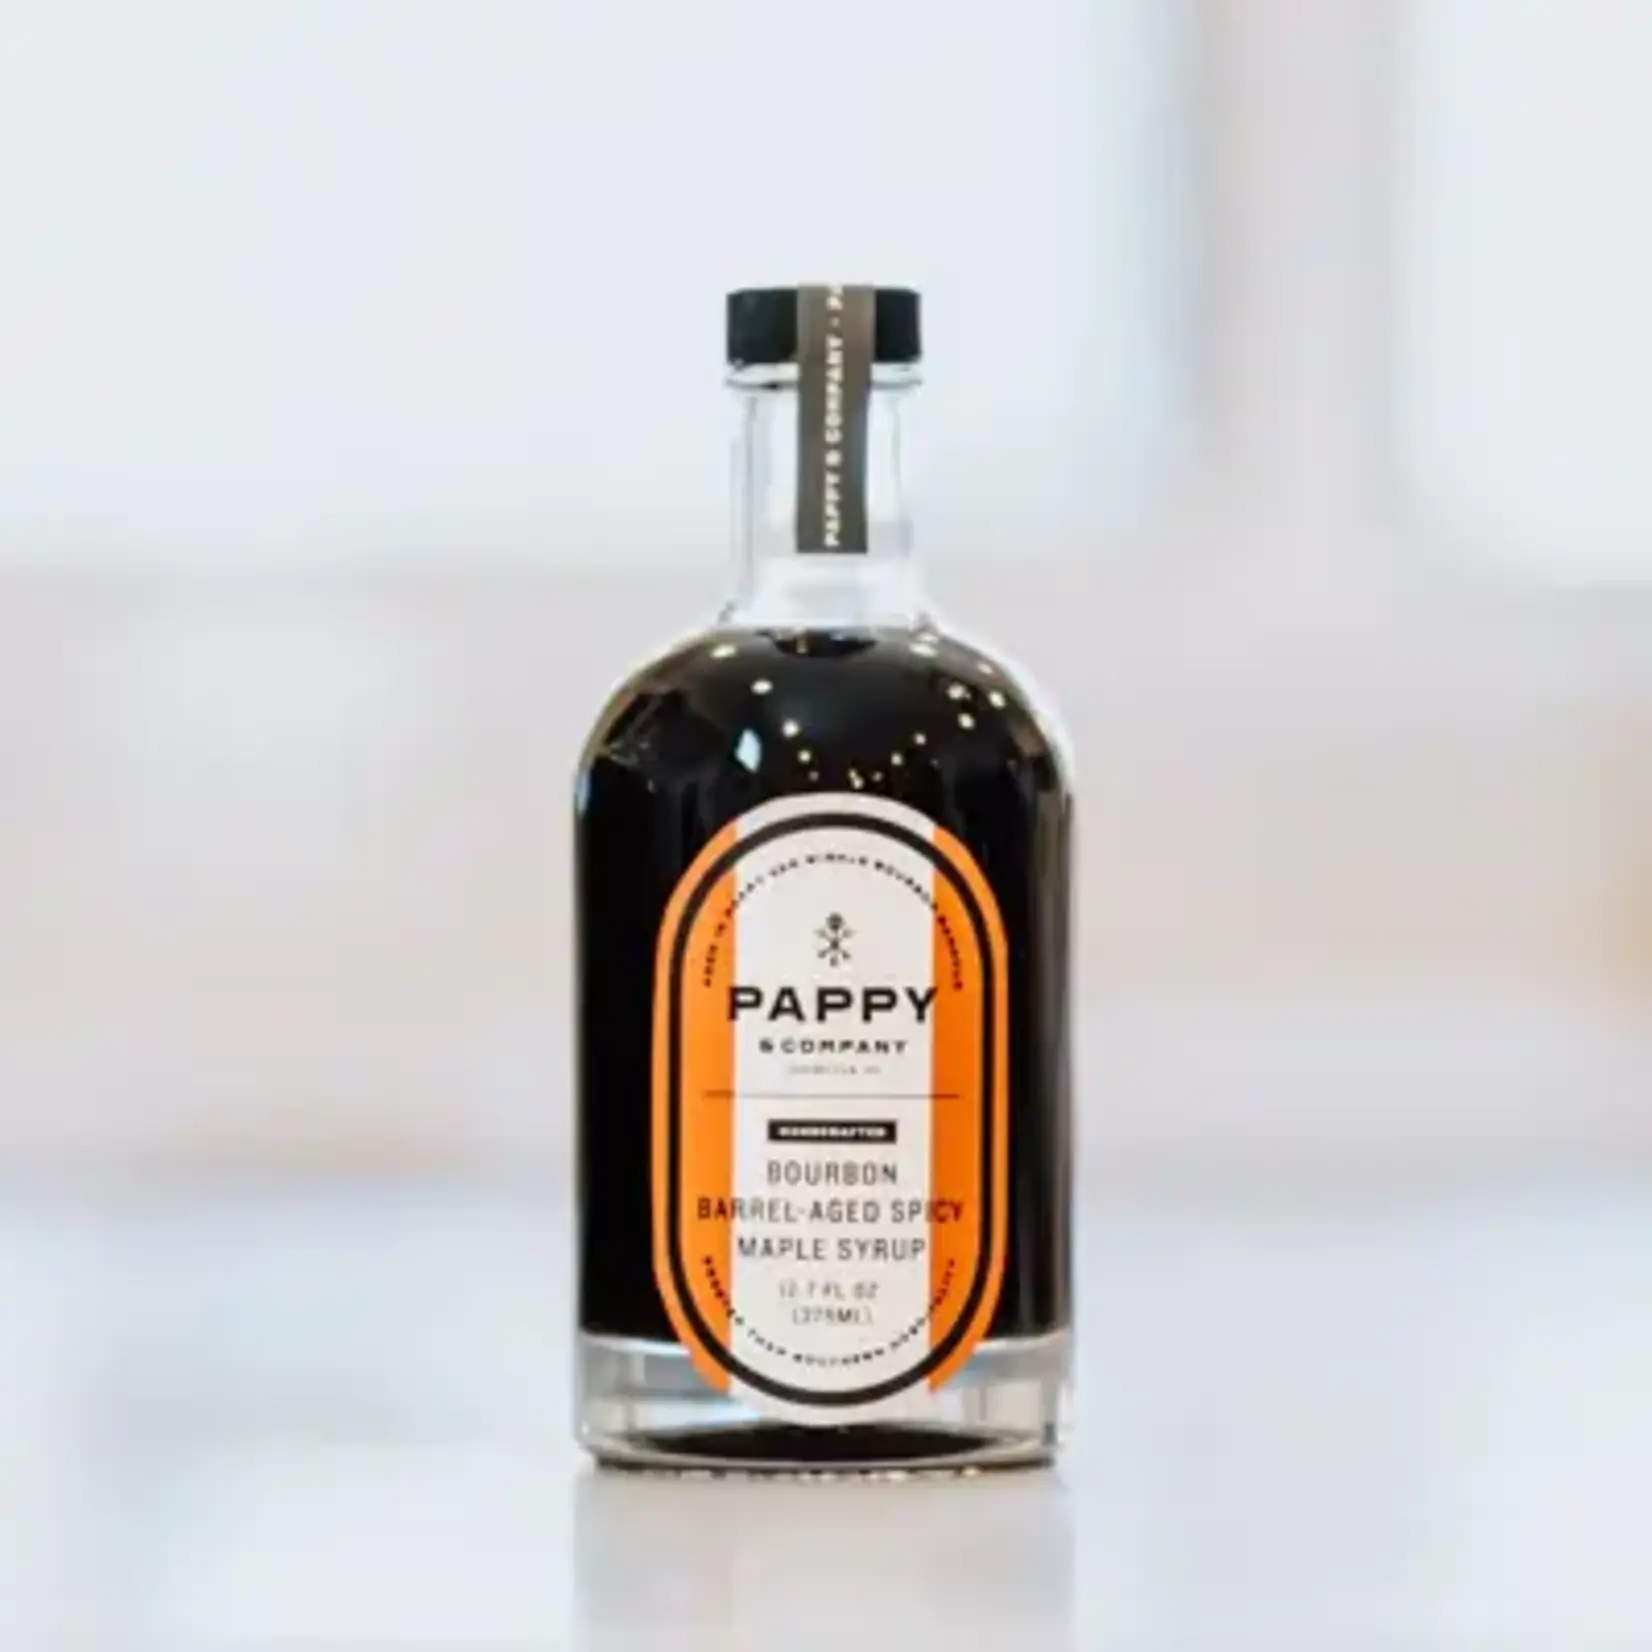 Pappy Van Winkle Pappy Bourbon Barrel Aged Maple Syrup